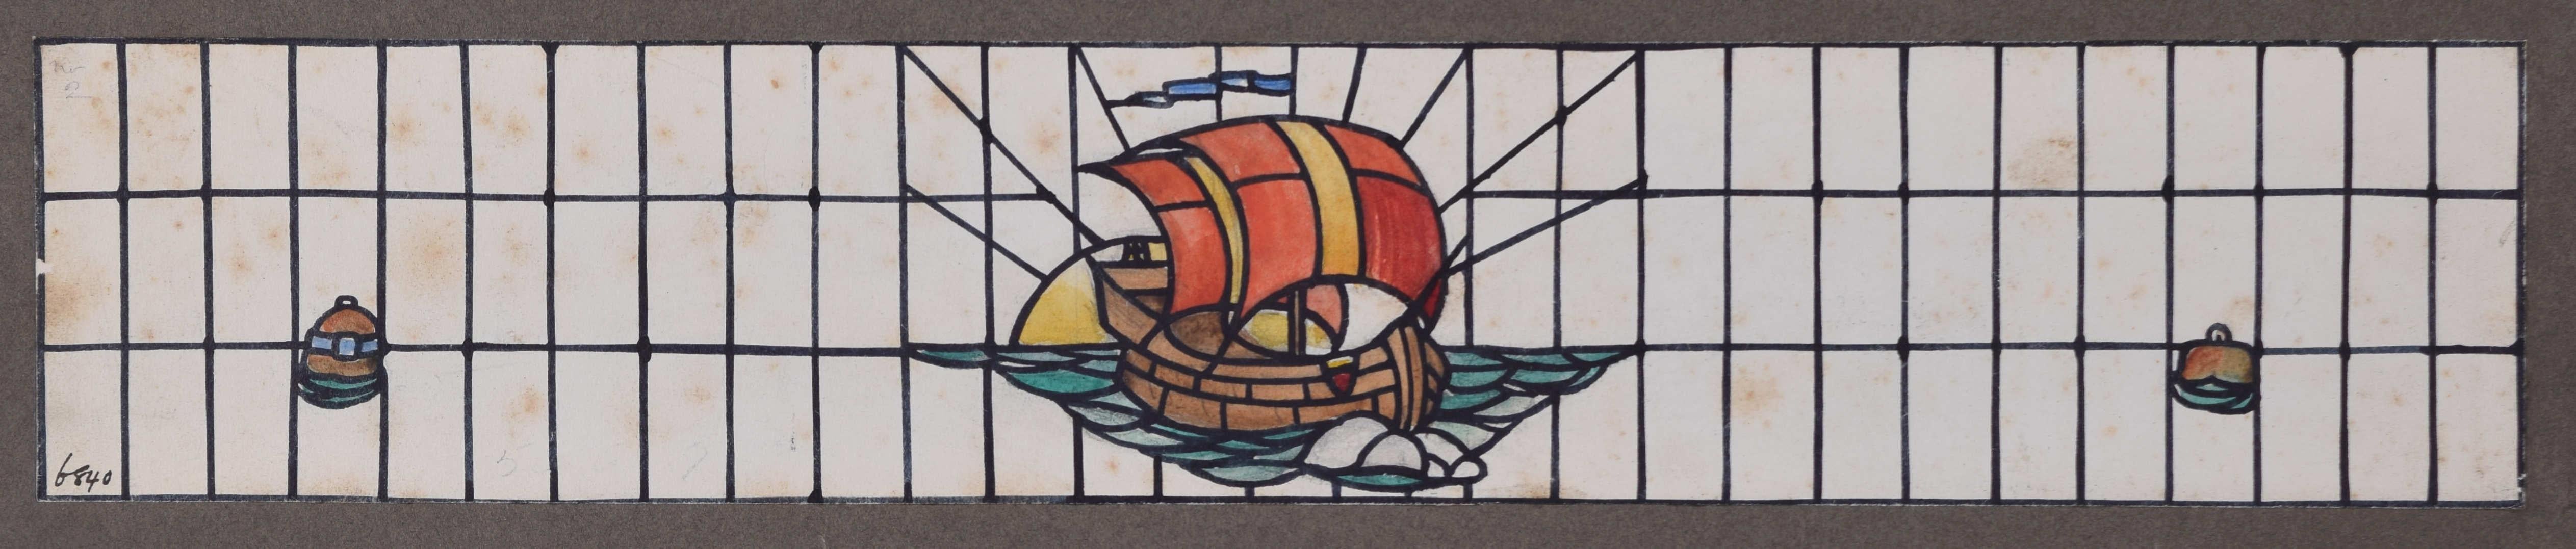 Red Sailing Ship Stained Glass Window Design c 1900 For TW Camm by Florence Camm